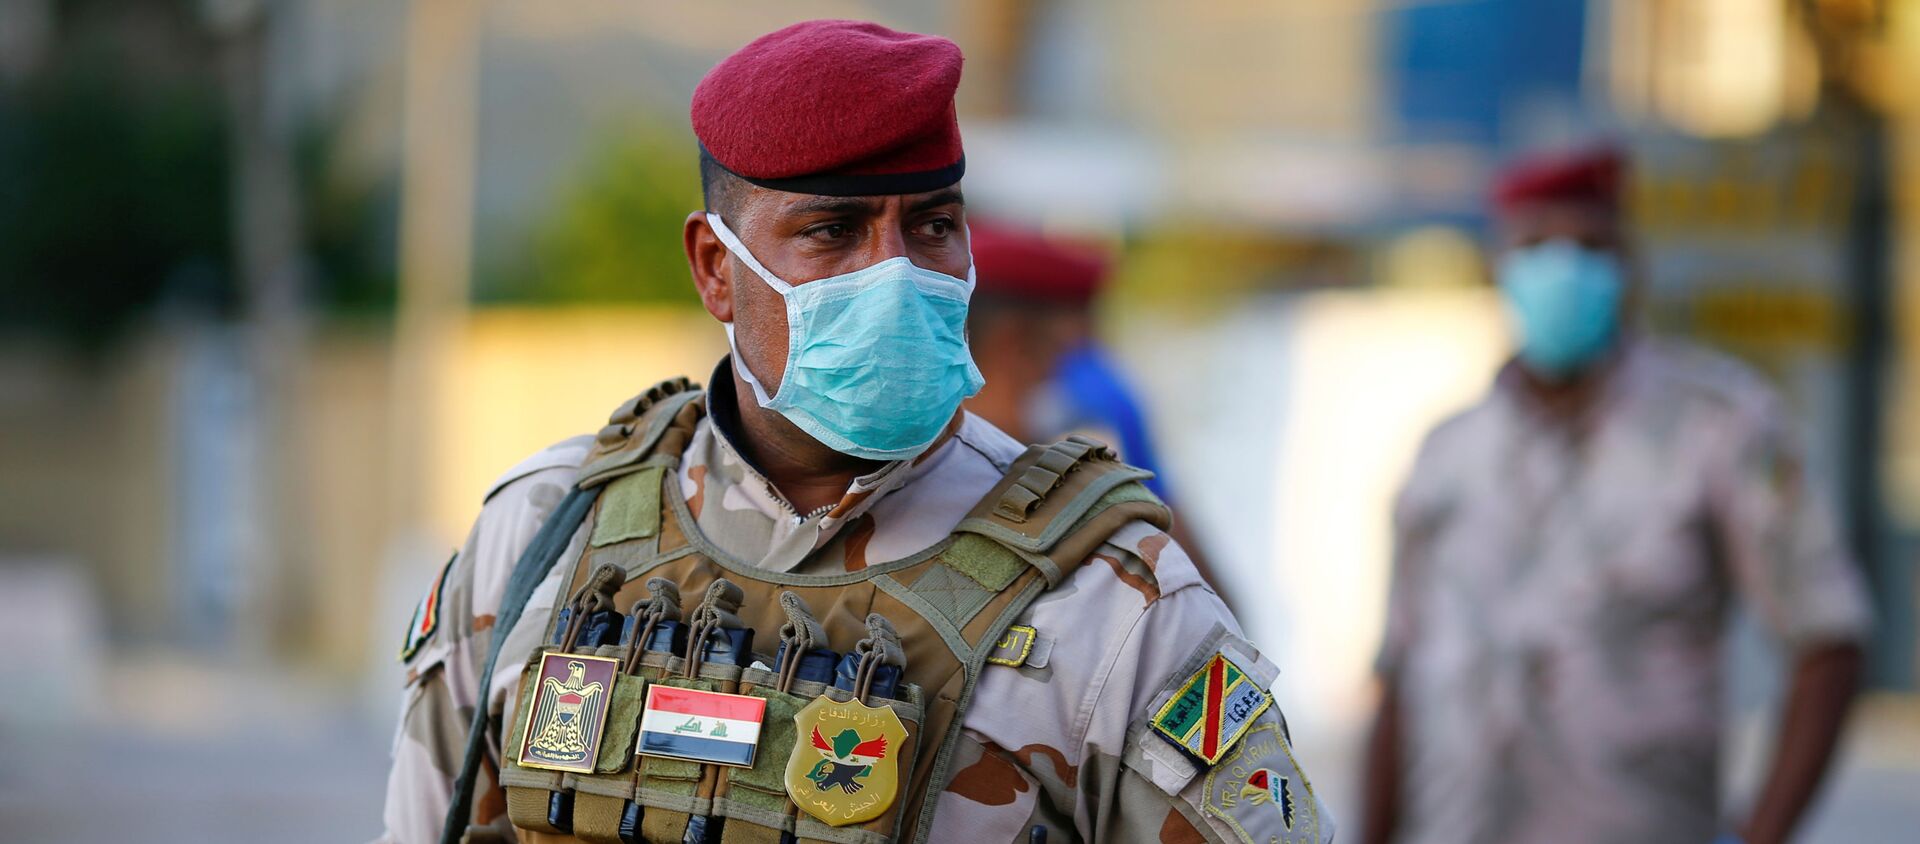 An Iraqi soldier wears a protective face mask as he stands guard at a check point, enforcing a curfew imposed to prevent the spread of the coronavirus disease (COVID-19), during the holy fasting month of Ramadan, in Baghdad, Iraq May 3, 2020 - Sputnik International, 1920, 20.05.2020